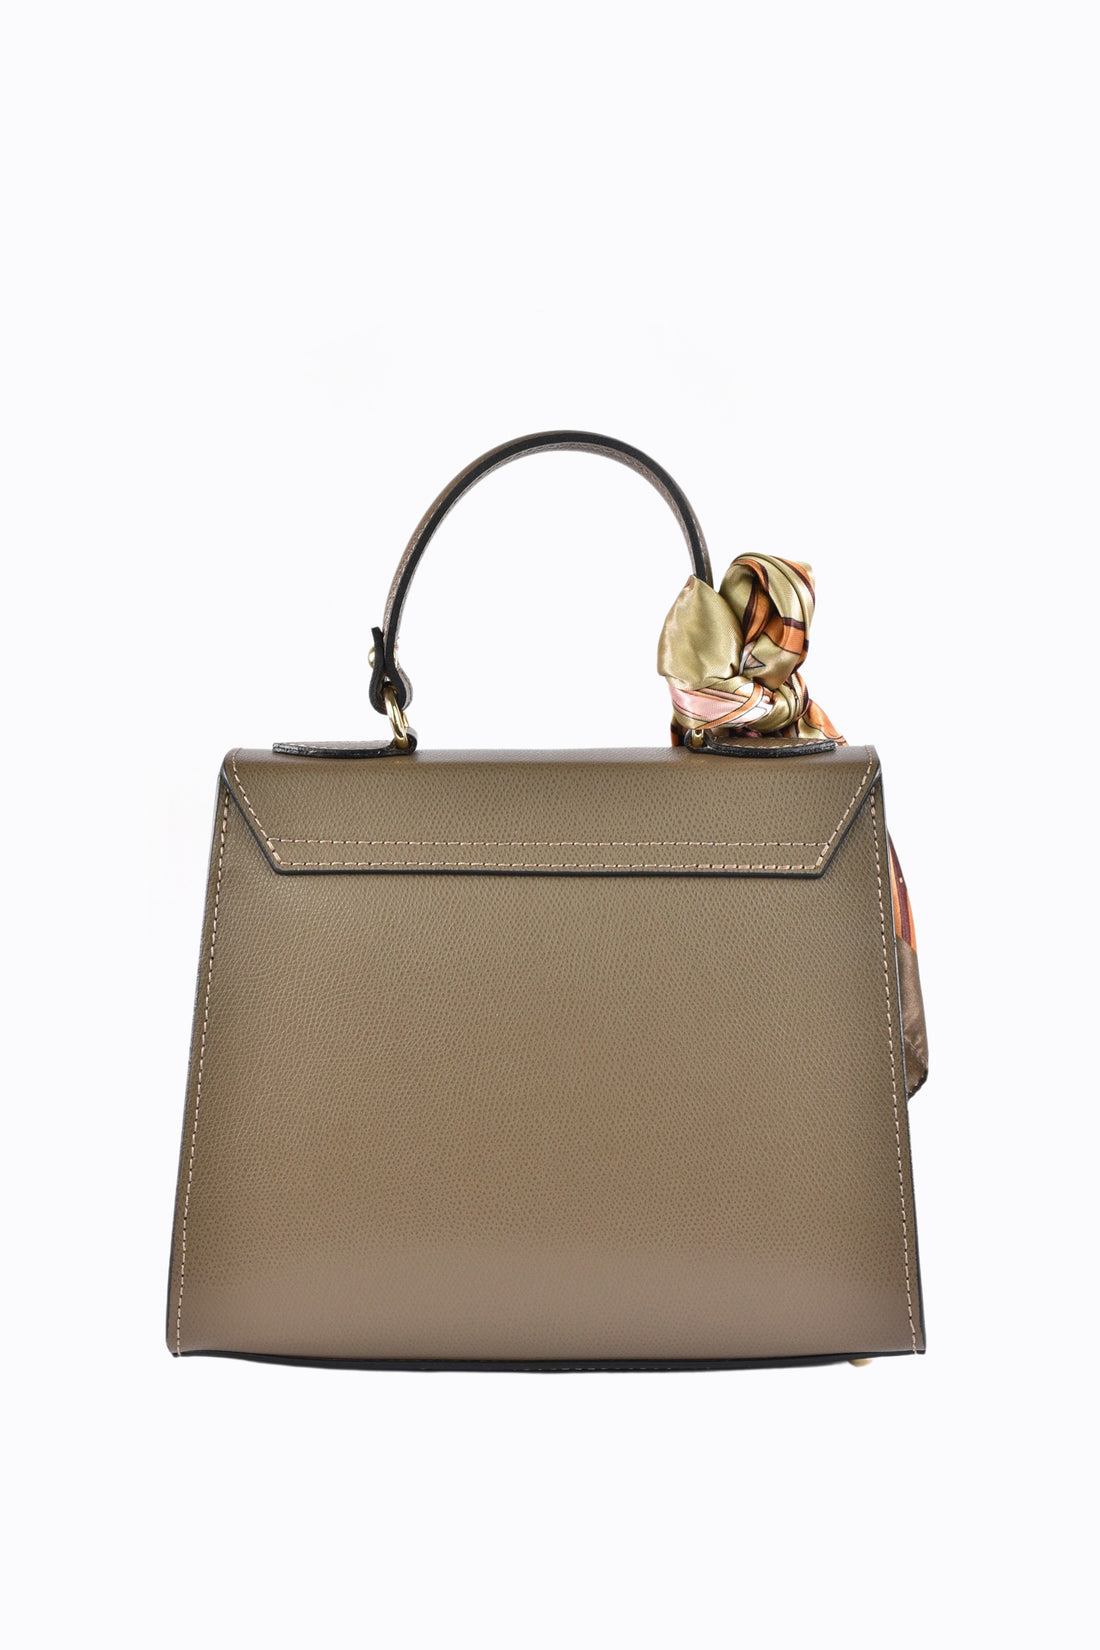 Marigold bag in Taupe saffiano leather